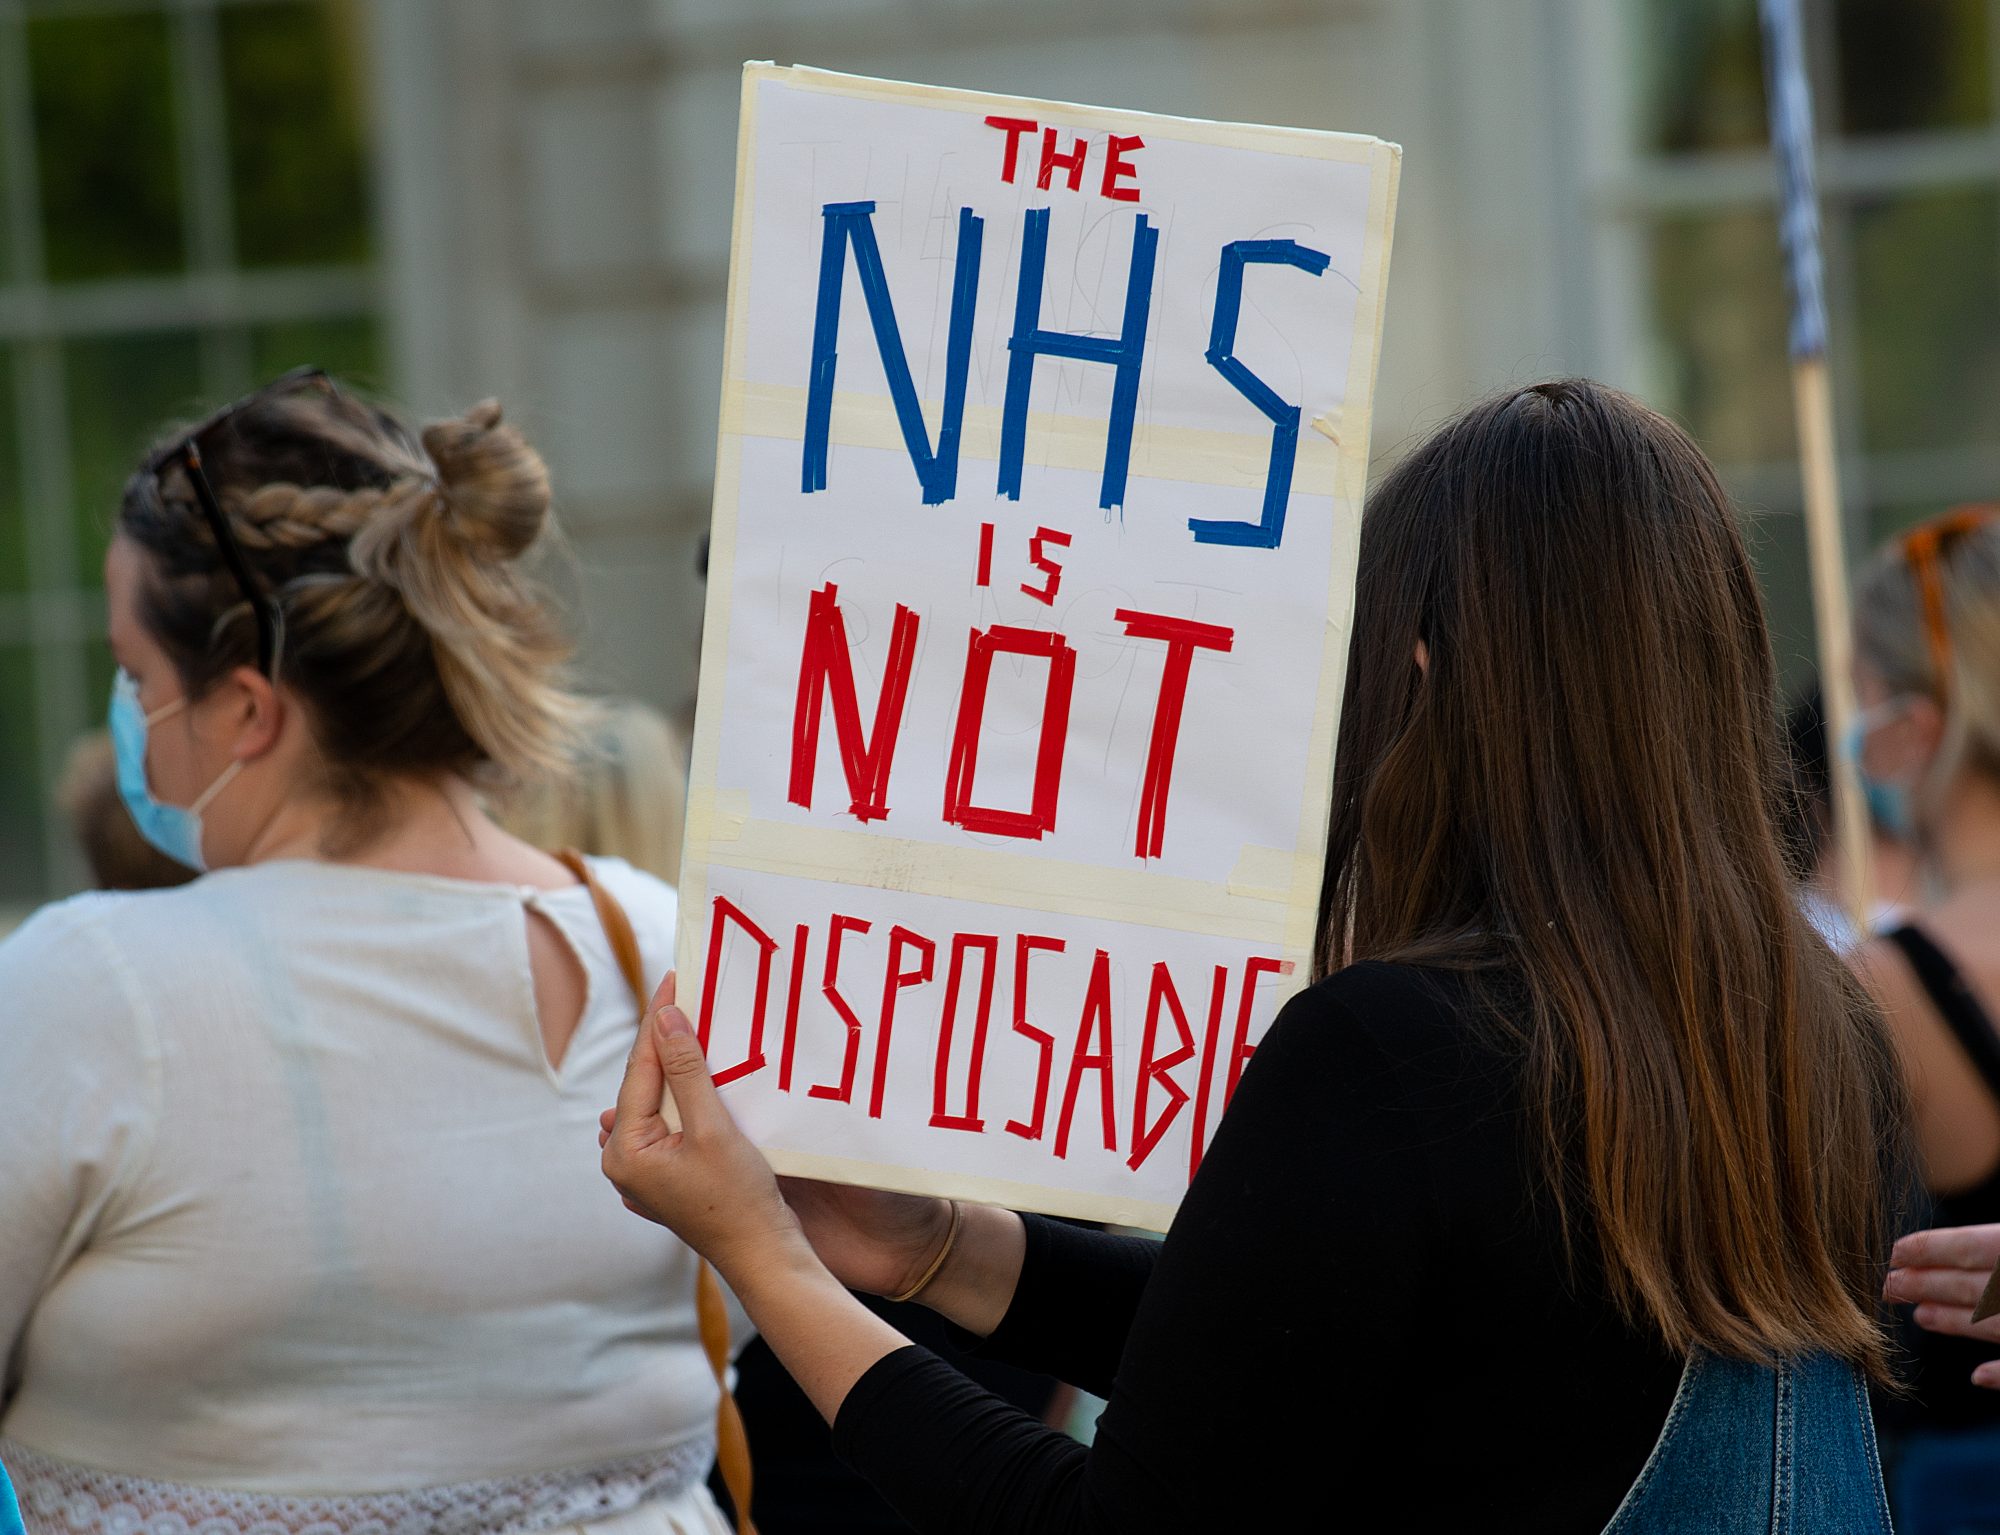 Sign reading 'THE NHS IS NOT DISPOSABLE'